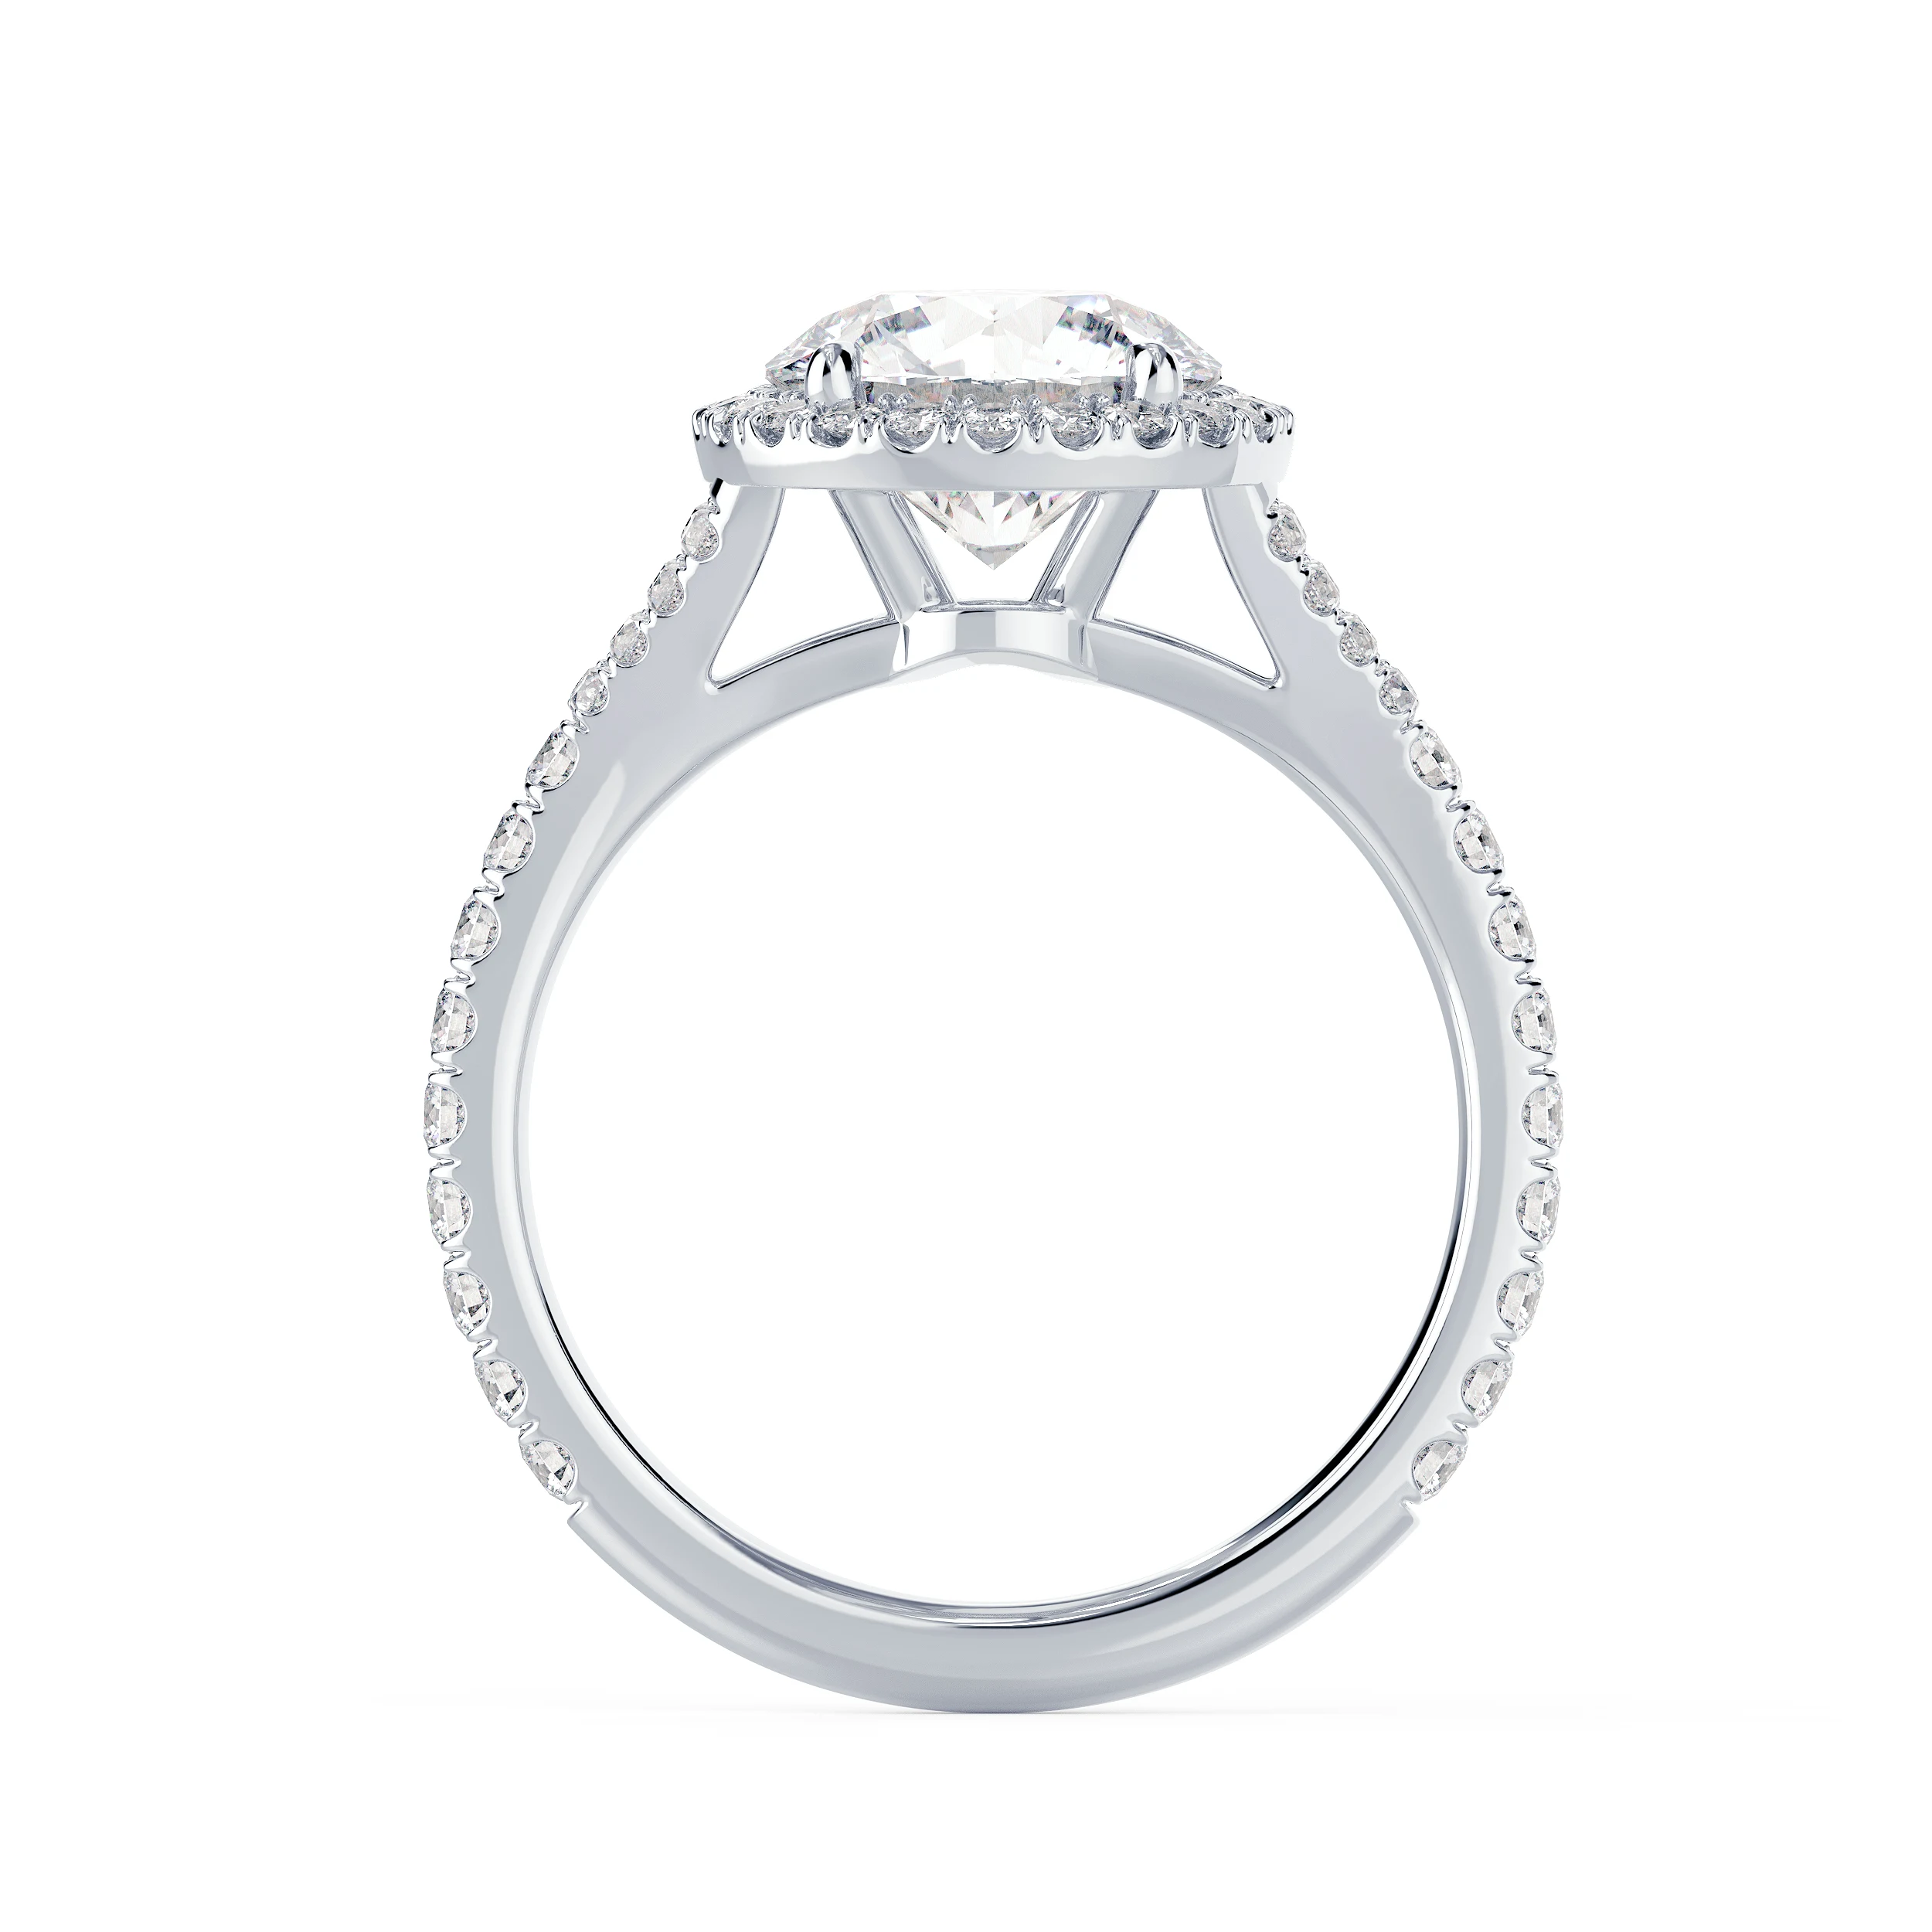 White Gold Single Halo Split Shank Setting featuring High Quality Synthetic Diamonds (Profile View)